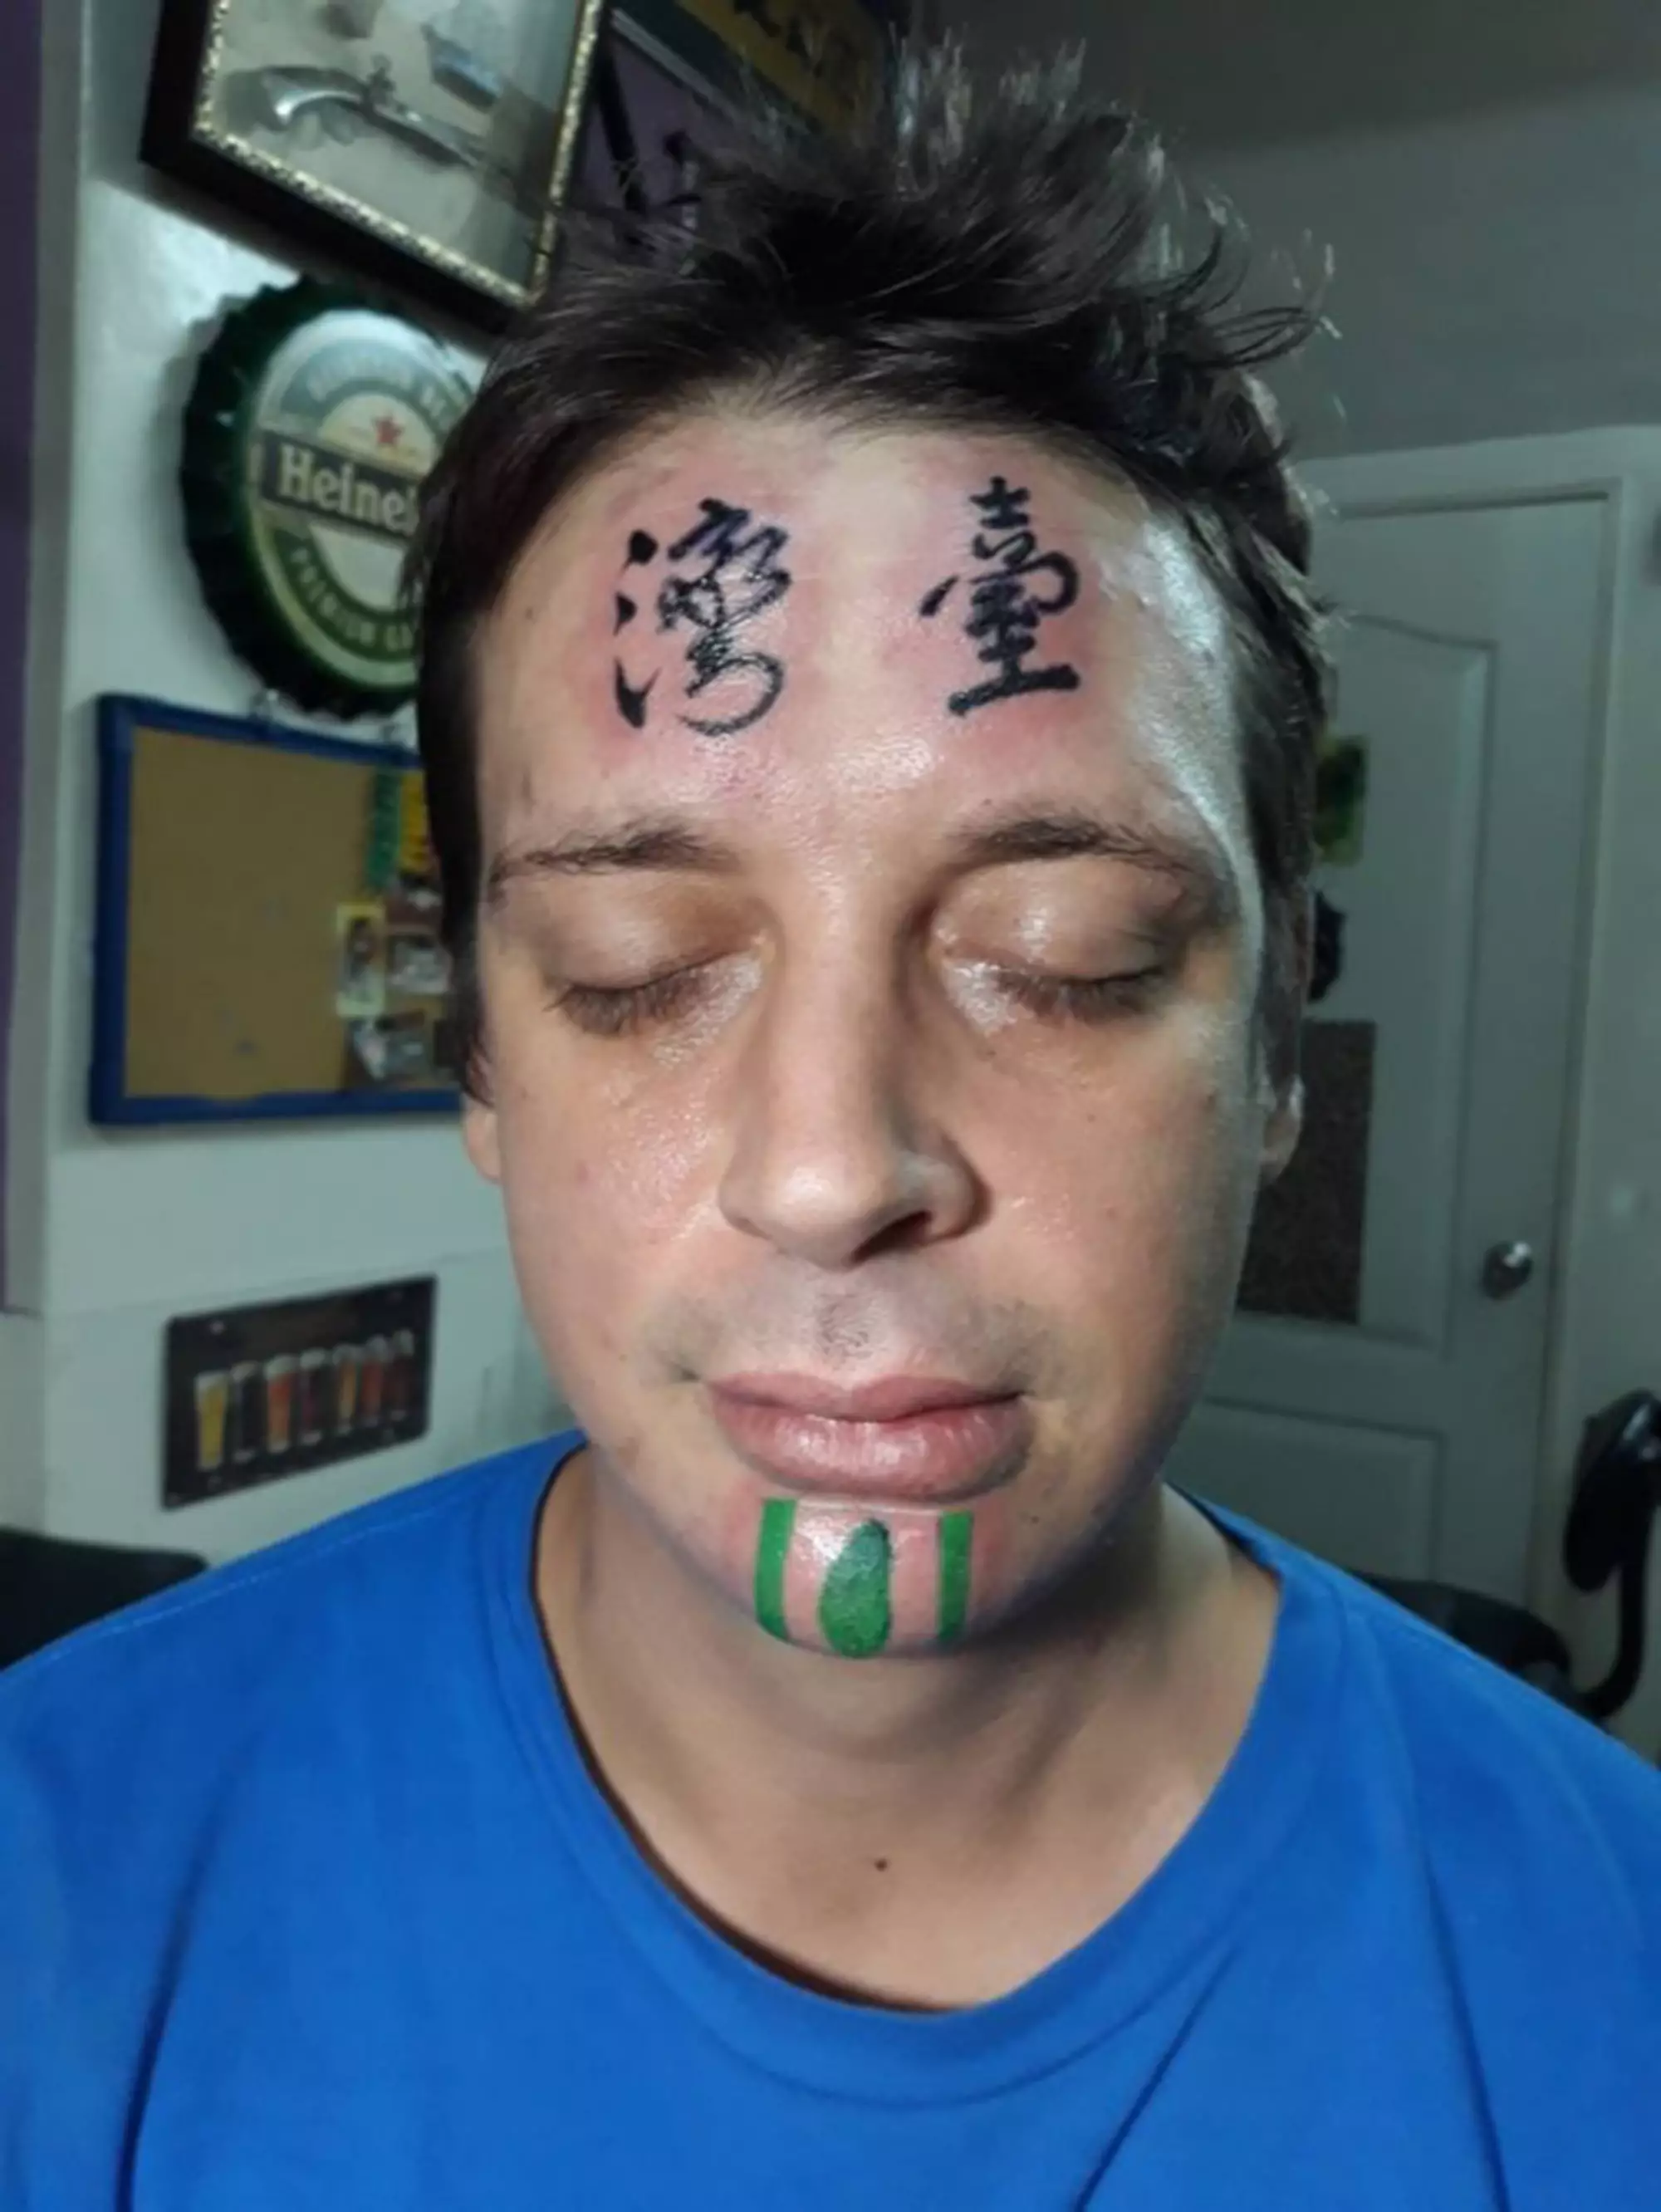 Man with face tattoo